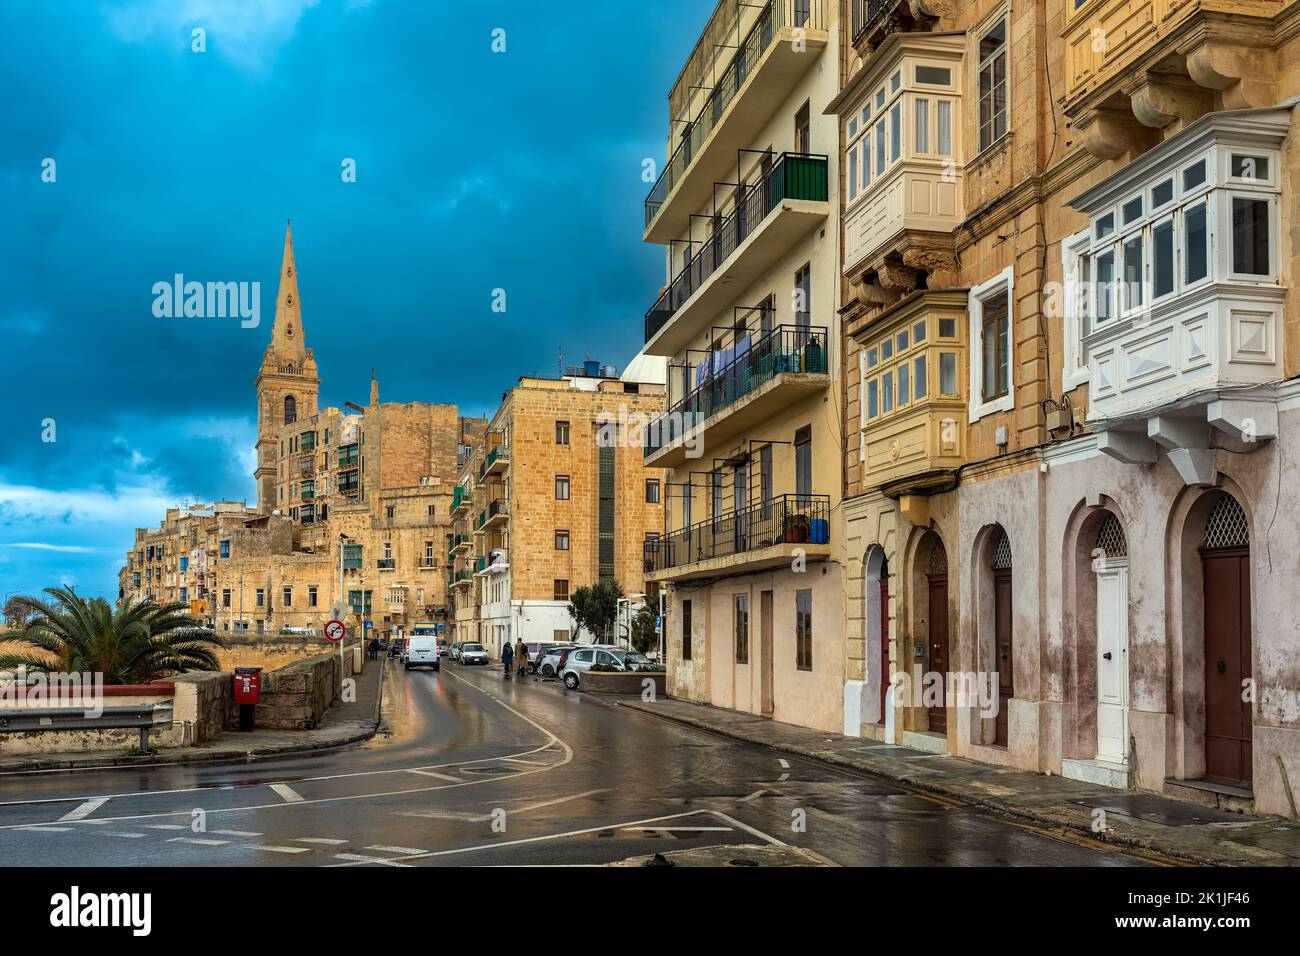 Typical residential building and the wet urban street under beautiful cloudy stormy sky in Valletta, Malta. Stock Photo